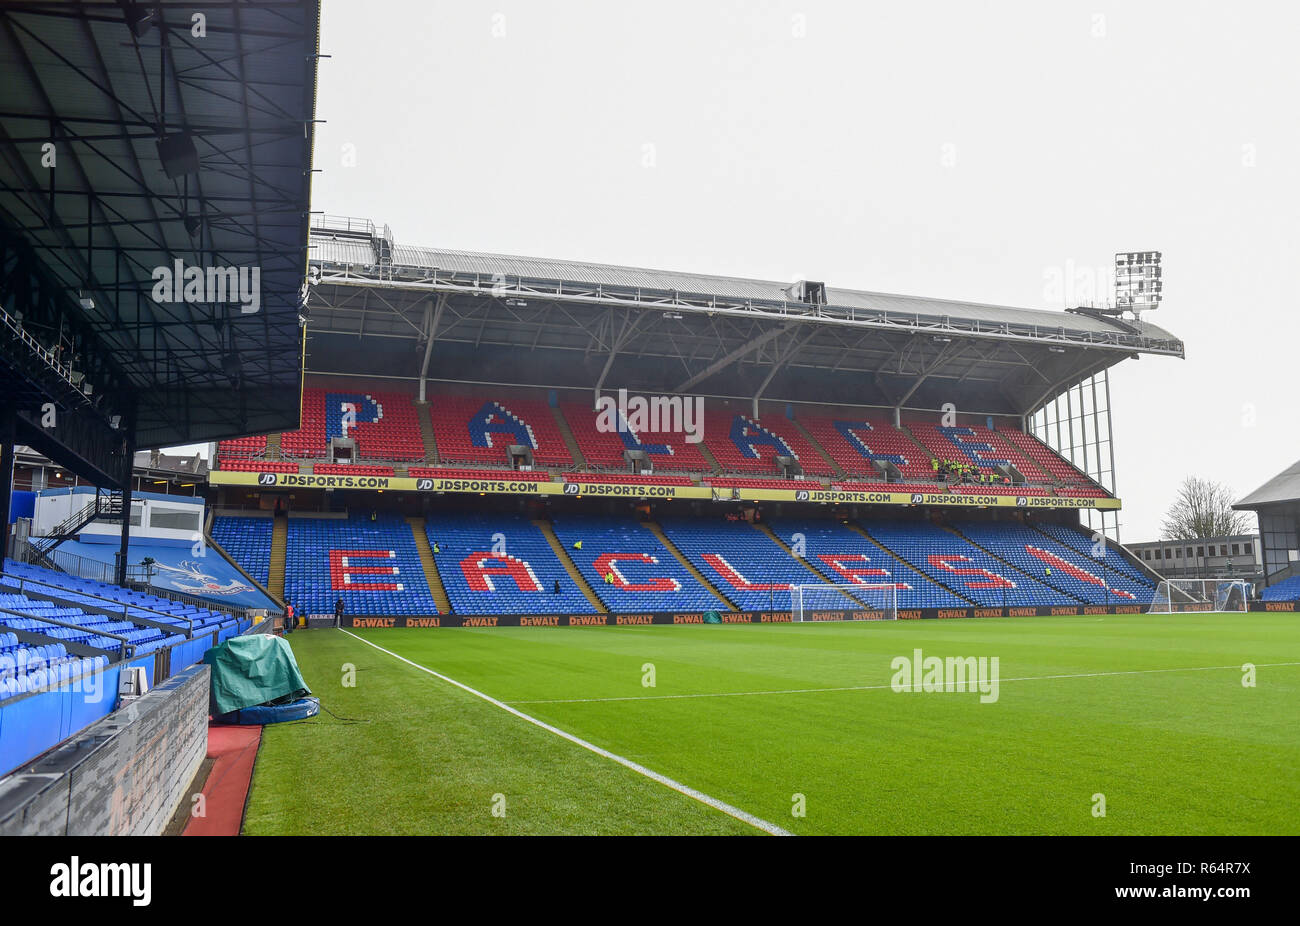 Quiet before the Premier League match between Crystal Palace and Burnley at Selhurst Park , London , 01 December 2018 Editorial use only. No merchandising. For Football images FA and Premier League restrictions apply inc. no internet/mobile usage without FAPL license - for details contact Football Dataco Stock Photo